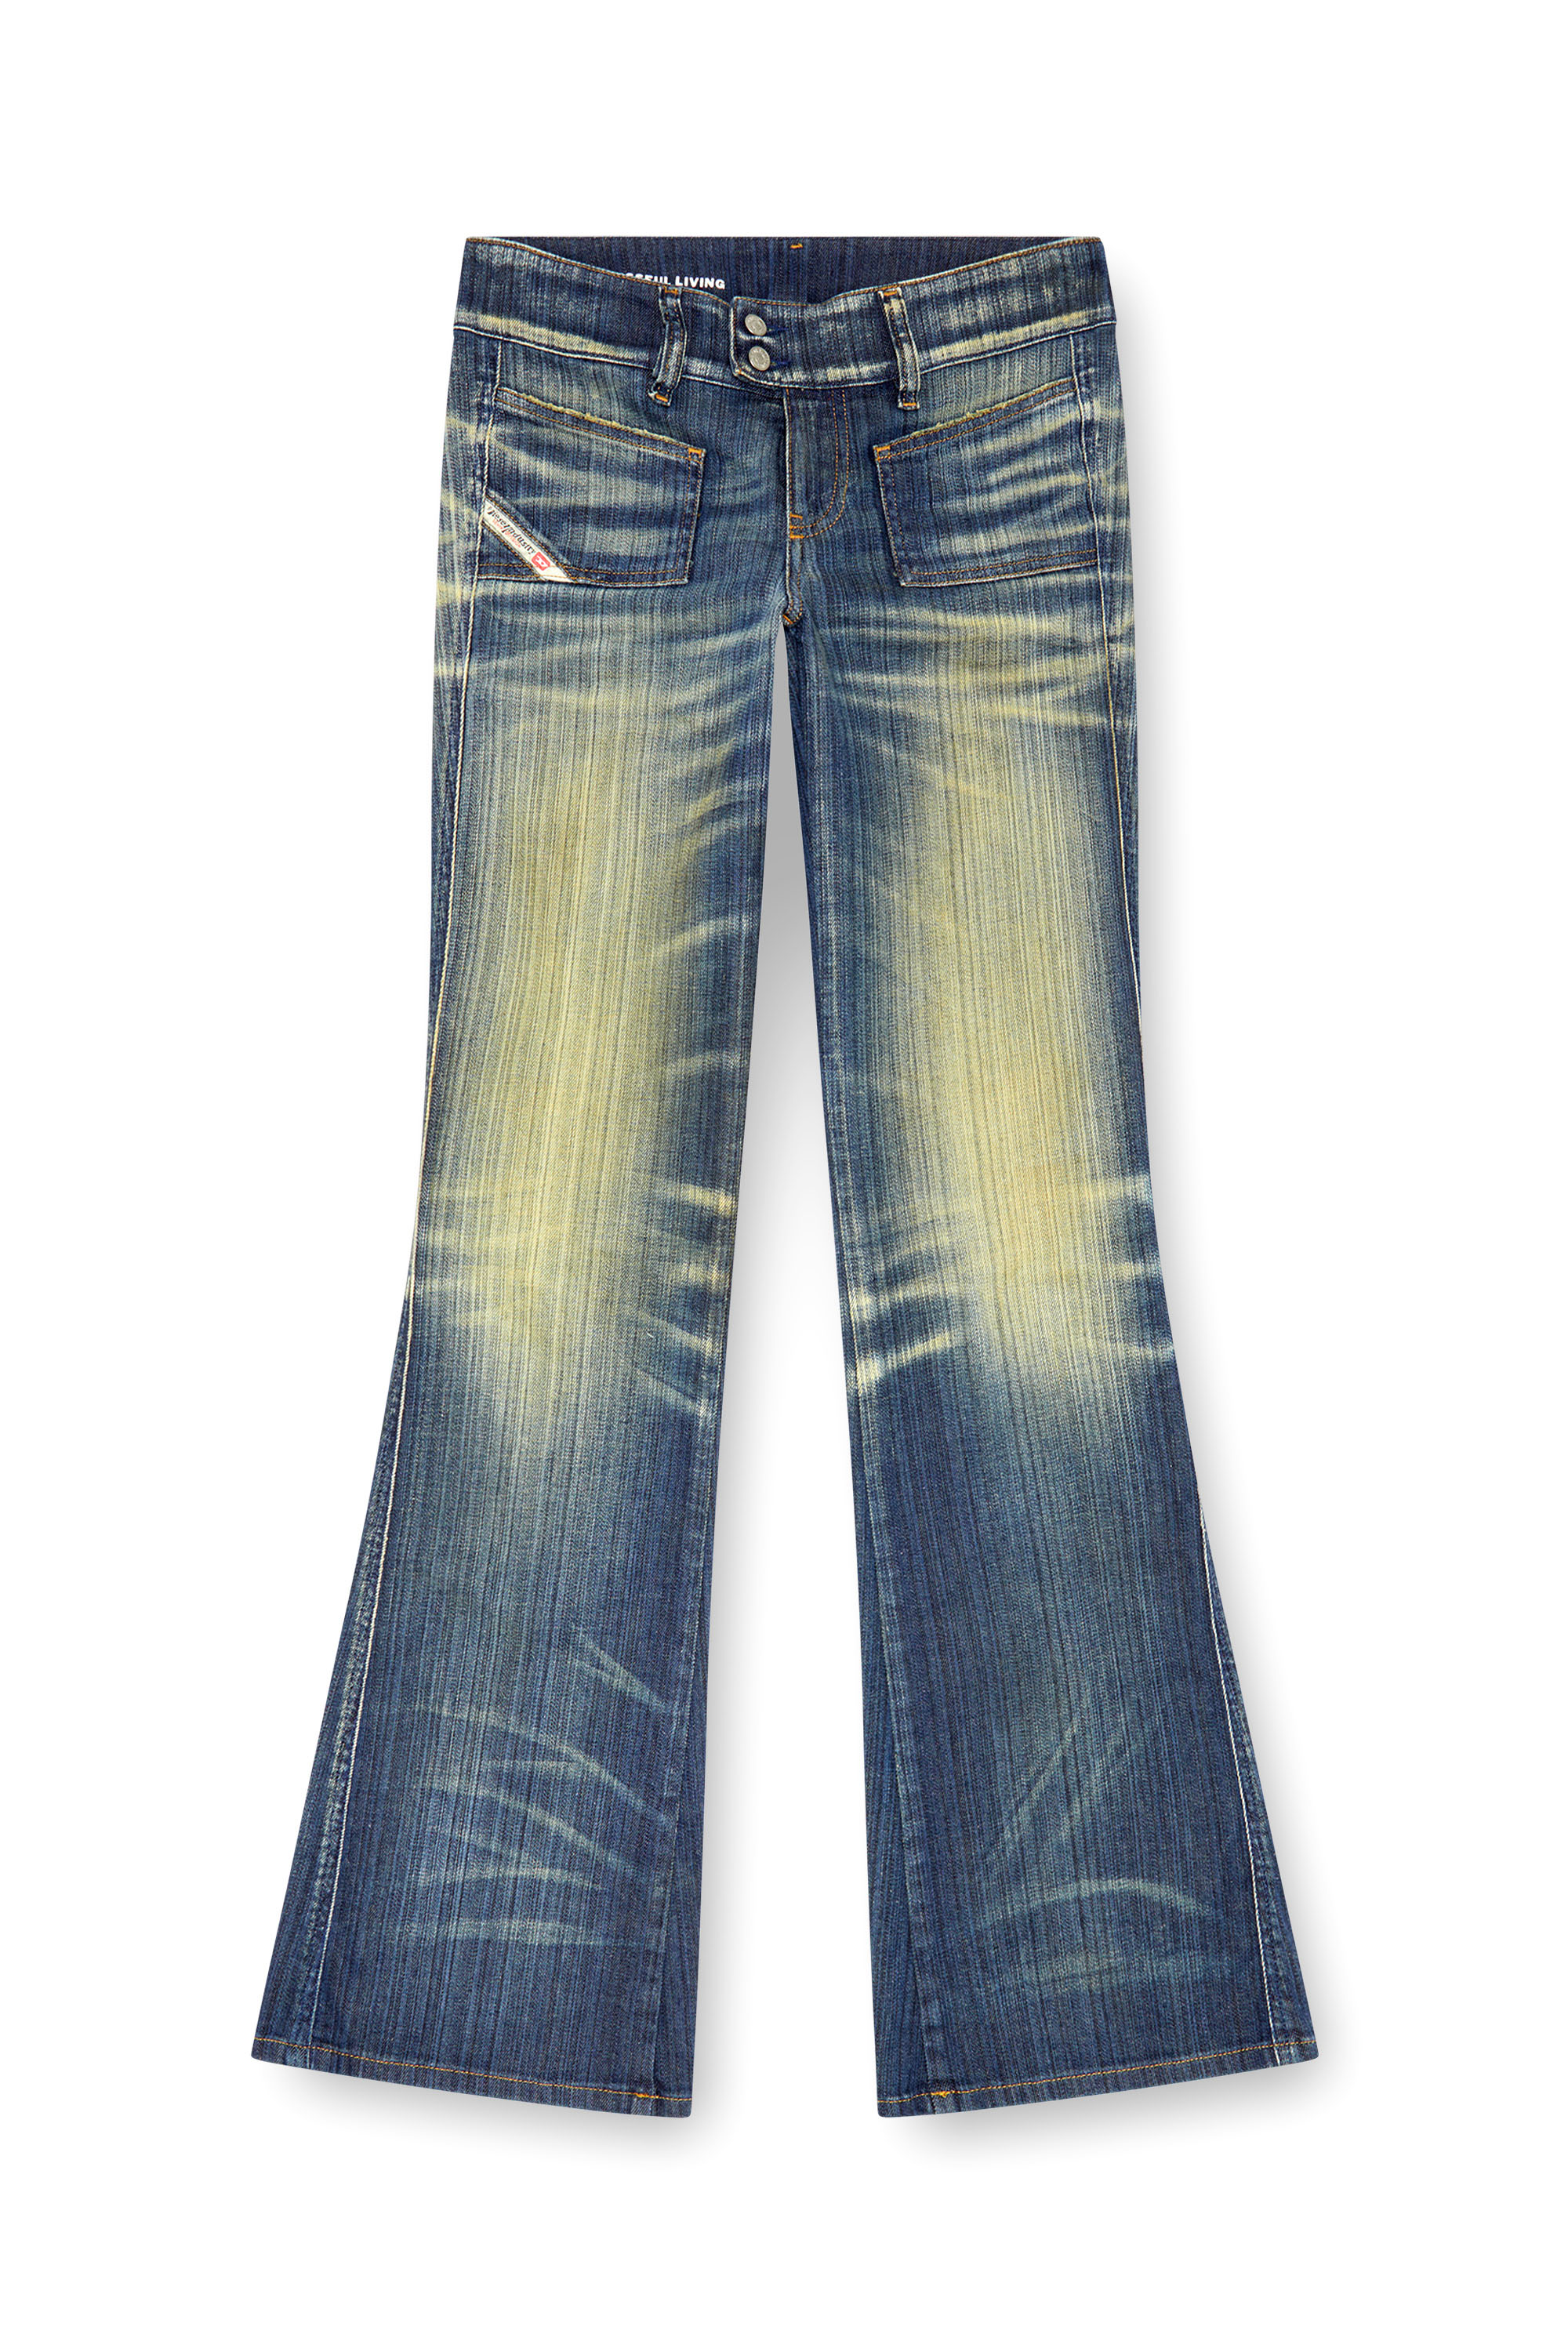 Diesel - Bootcut and Flare Jeans D-Hush 09J46, Mujer Bootcut y Flare Jeans - D-Hush in Azul marino - Image 6